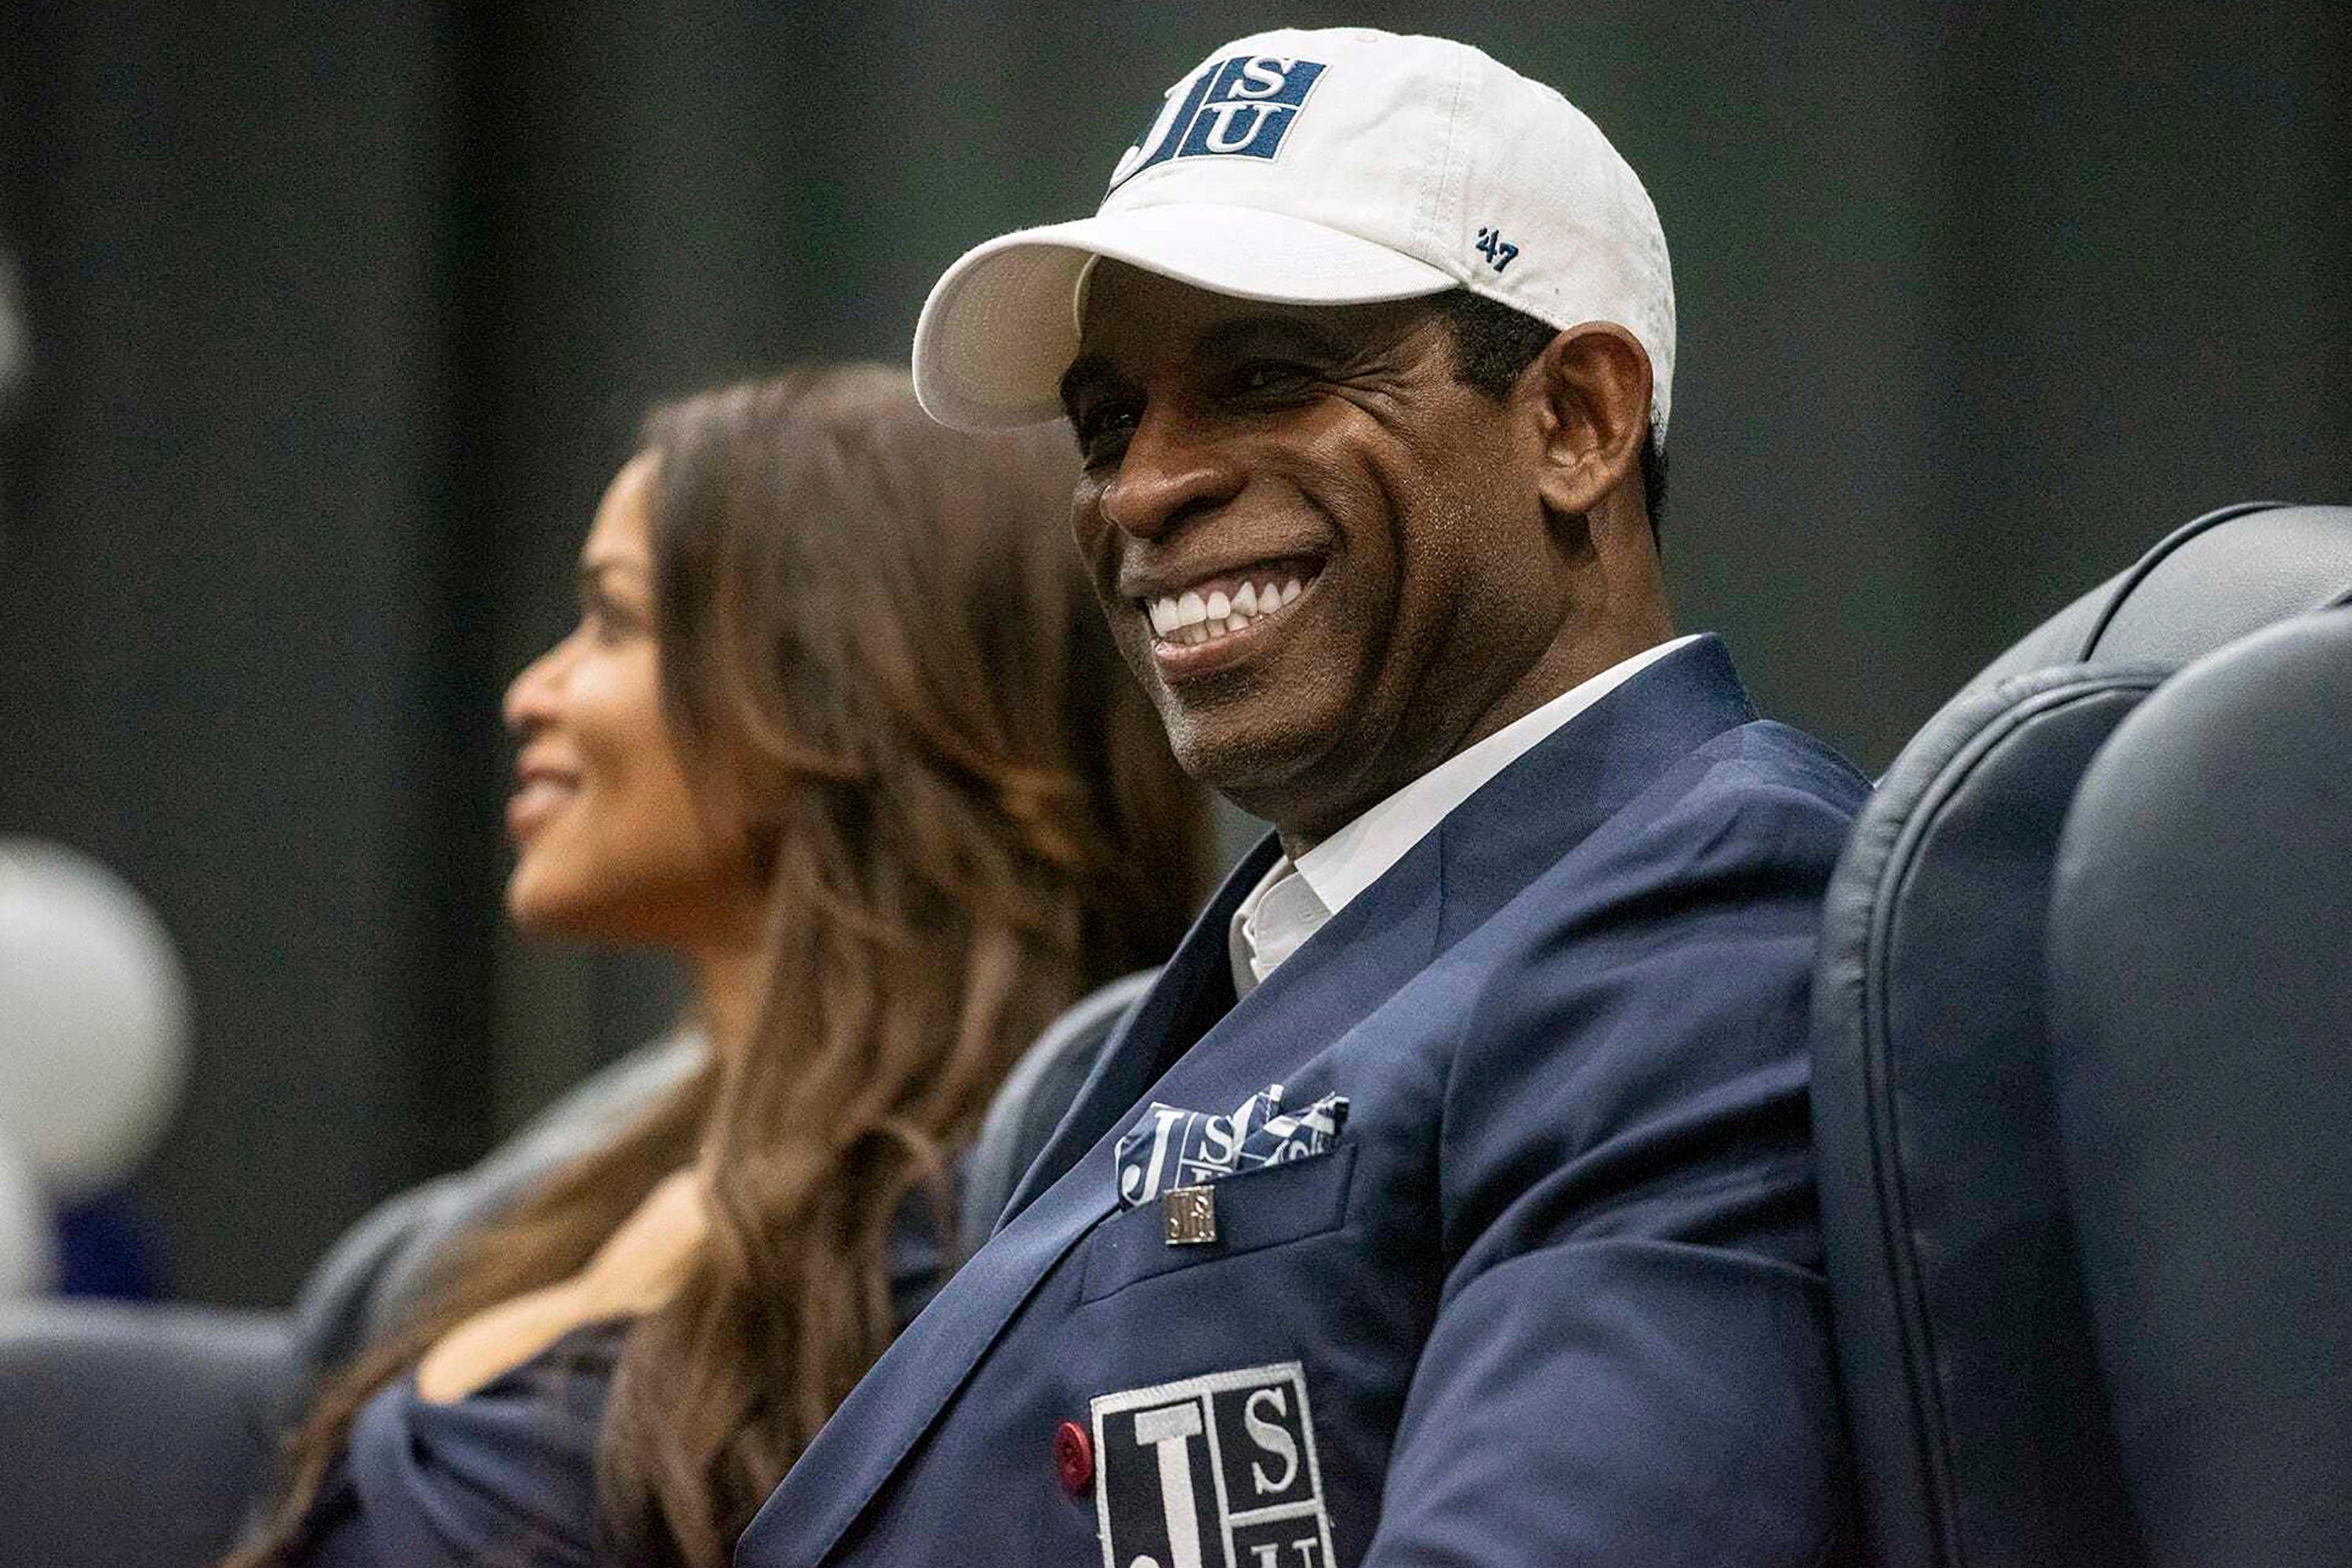 Match made in heaven': Deion Sanders to coach Jackson State Joy Jackson  Coach Heaven tigers | The Independent